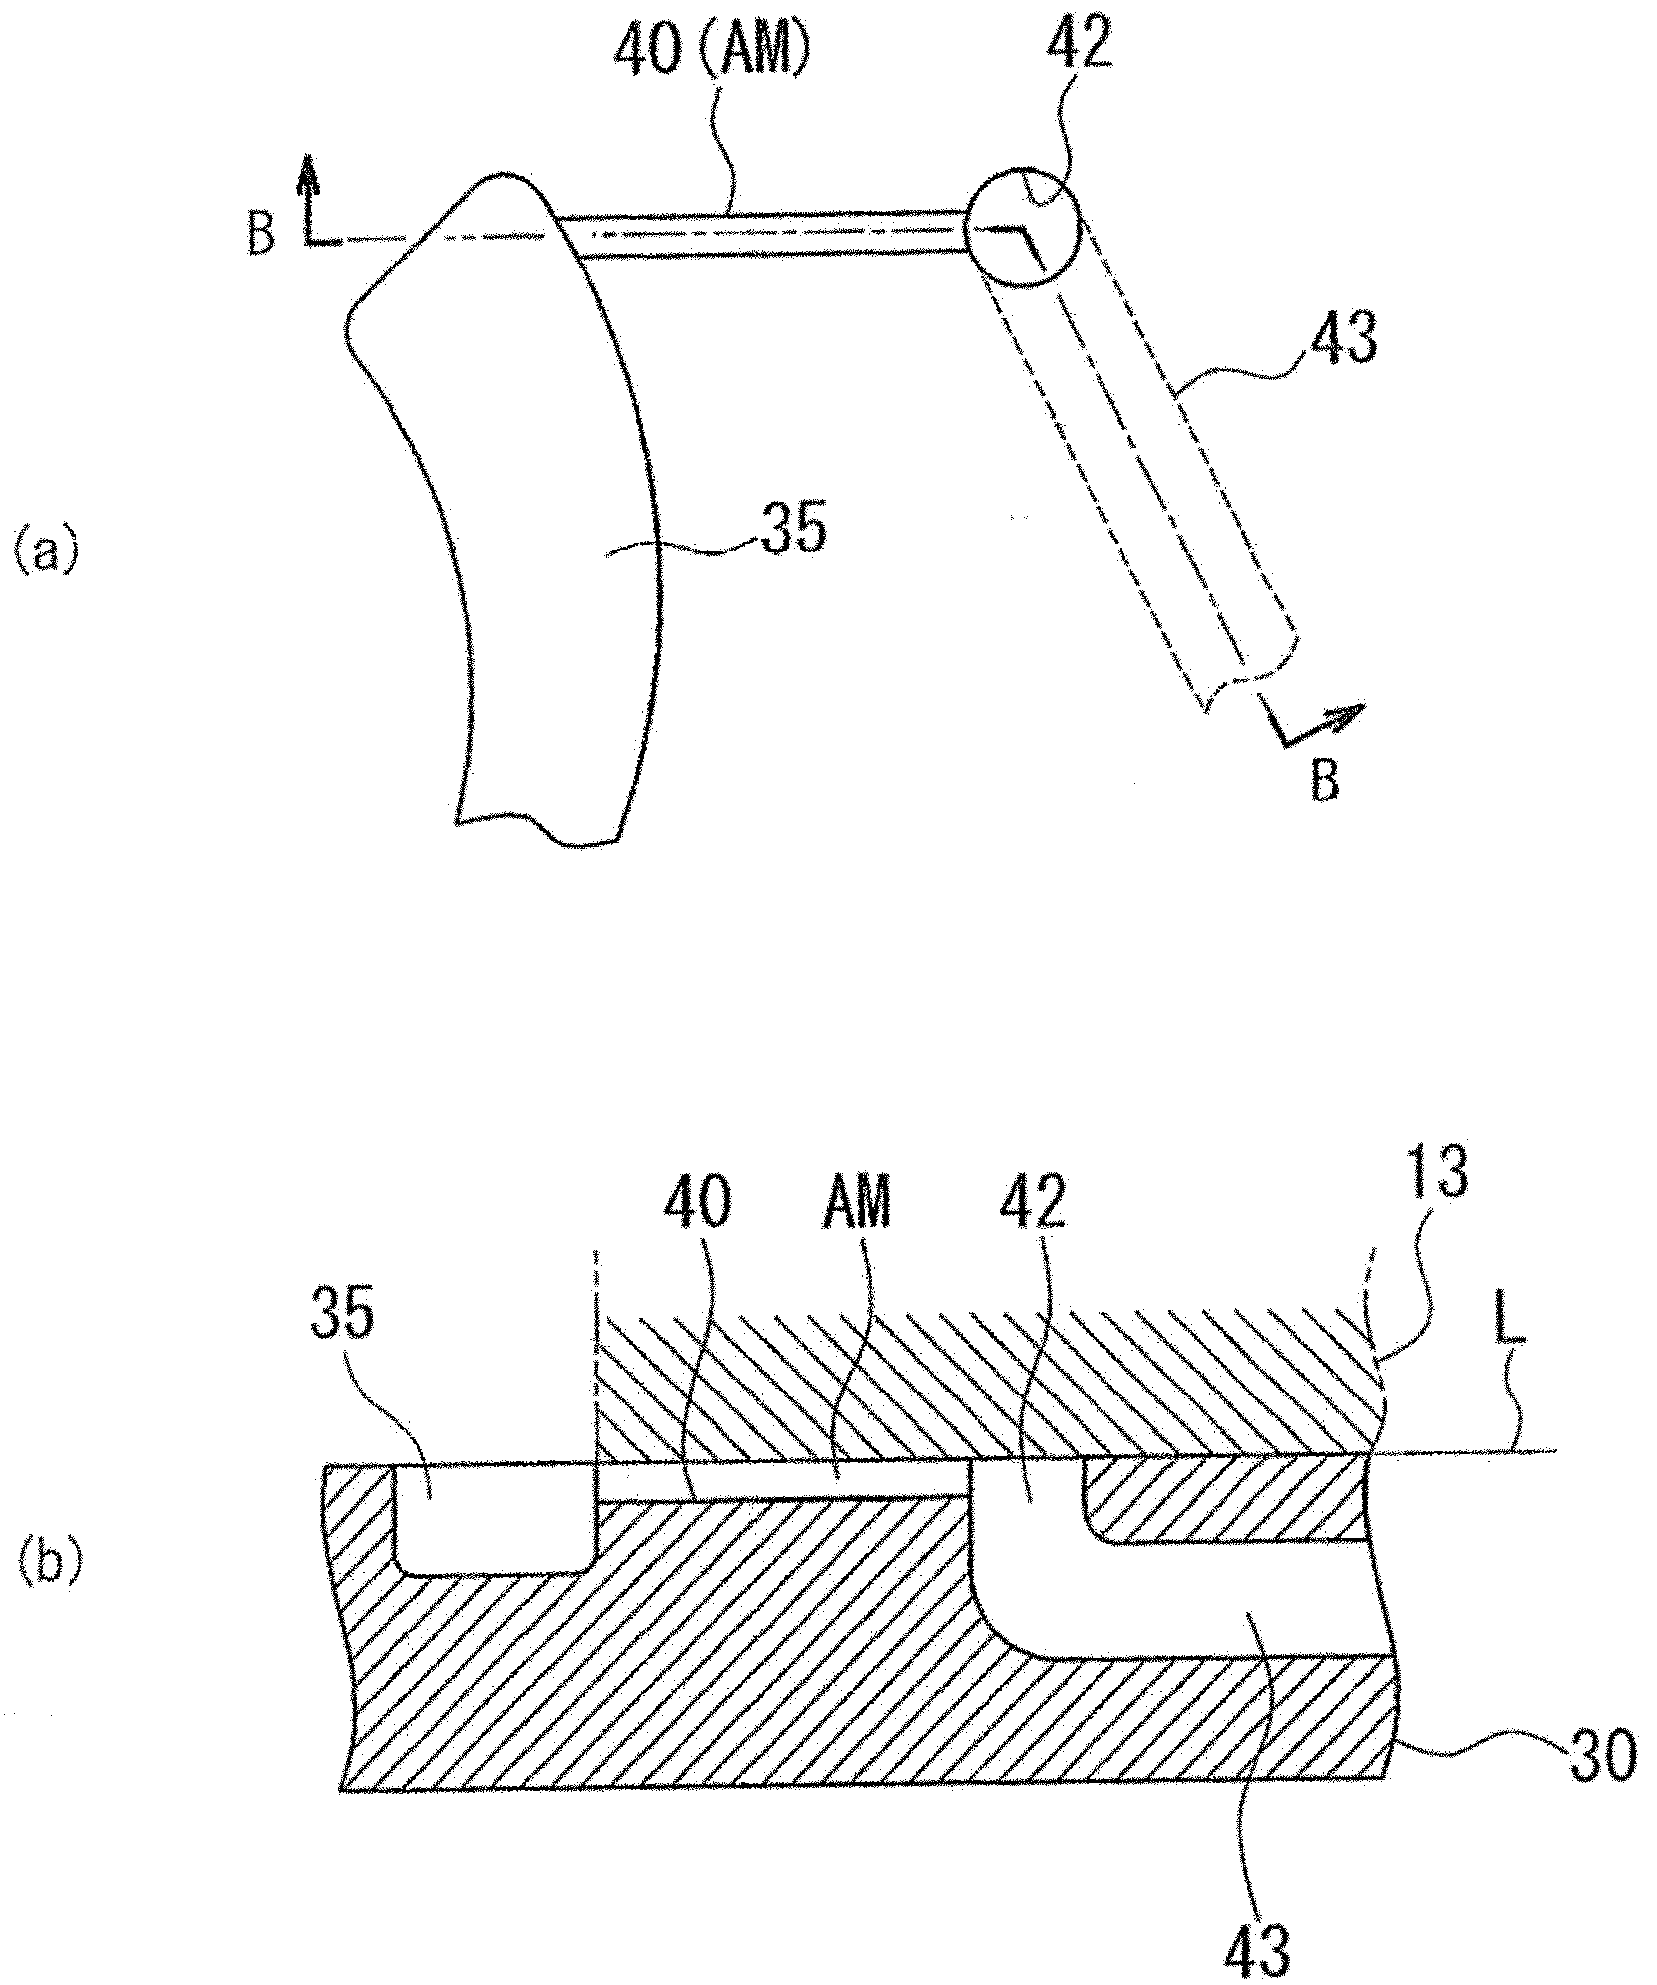 Air vent structure of oil pump of automatic transmission